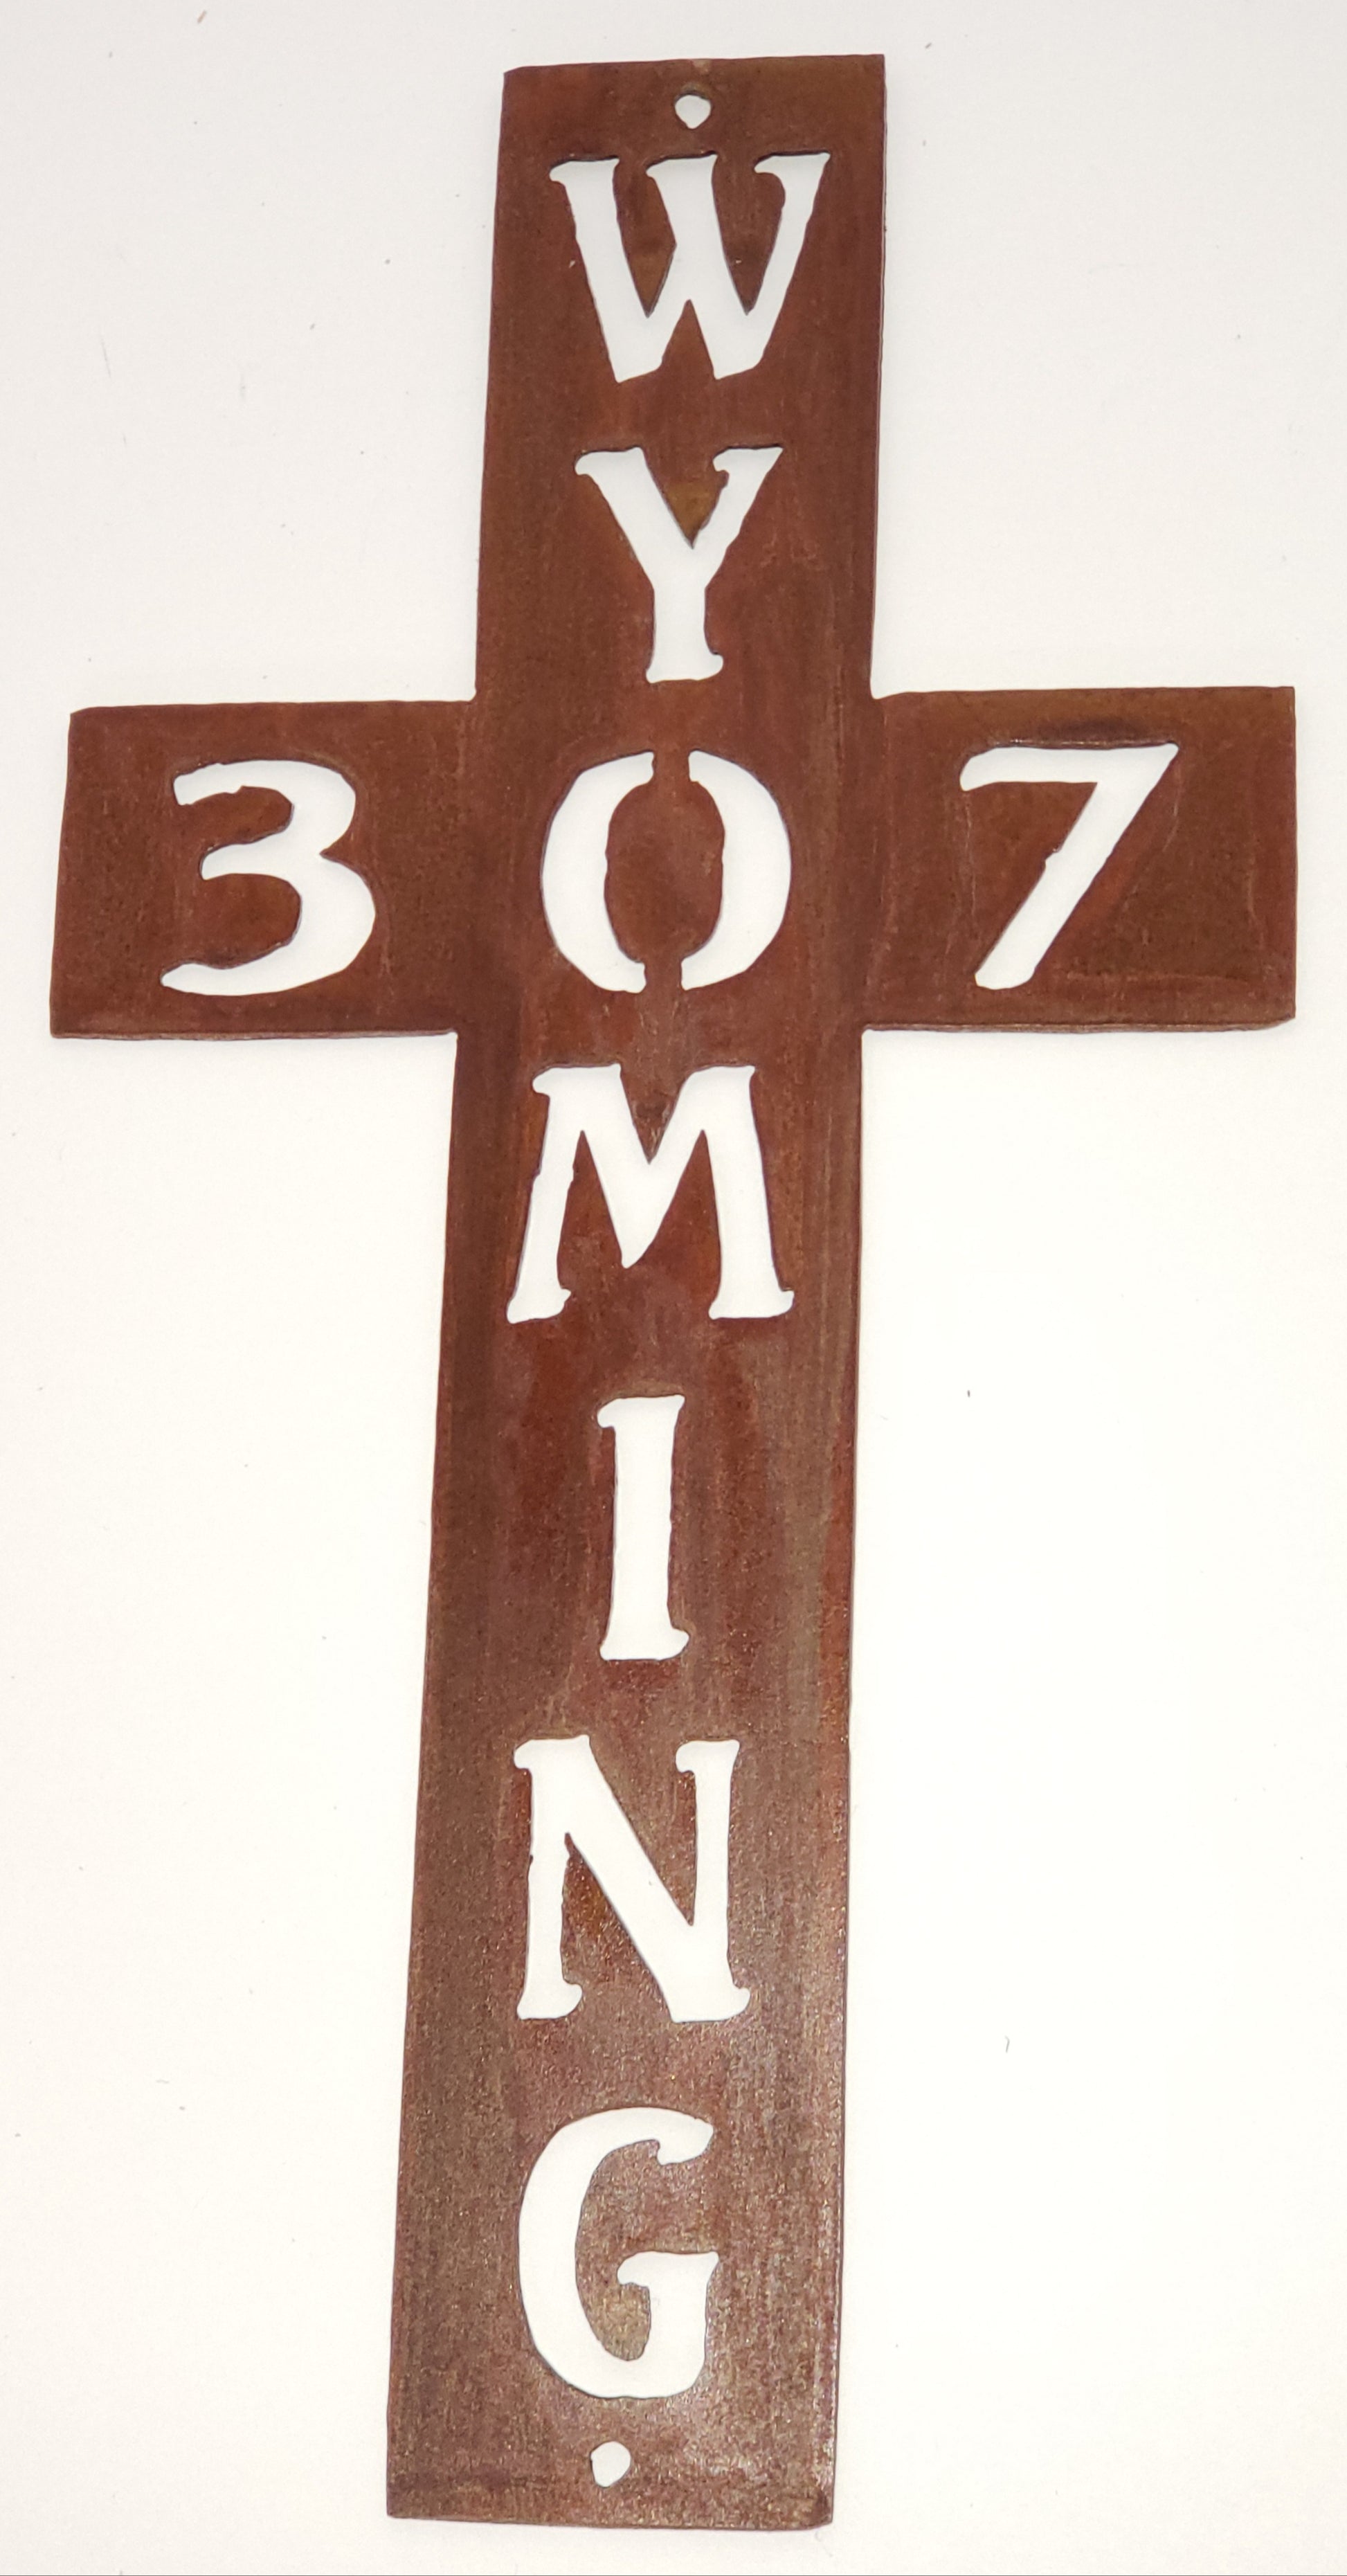 Large metal cross with Wyoming going down the cross and 307 across the cross.  The O and the 0 are used as the same.